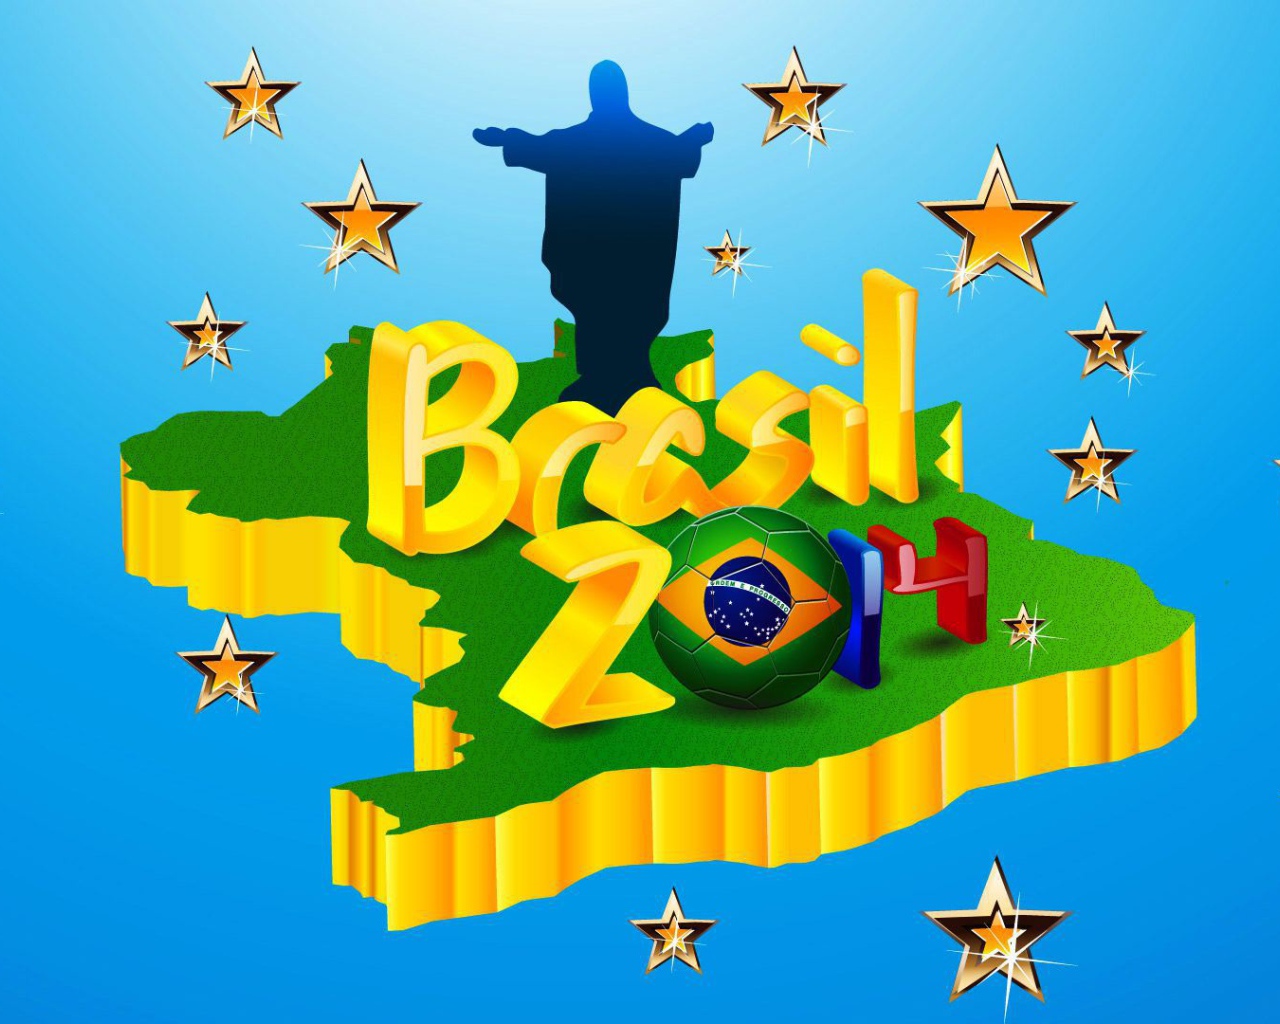 Logo on the map at the World Cup in Brazil 2014